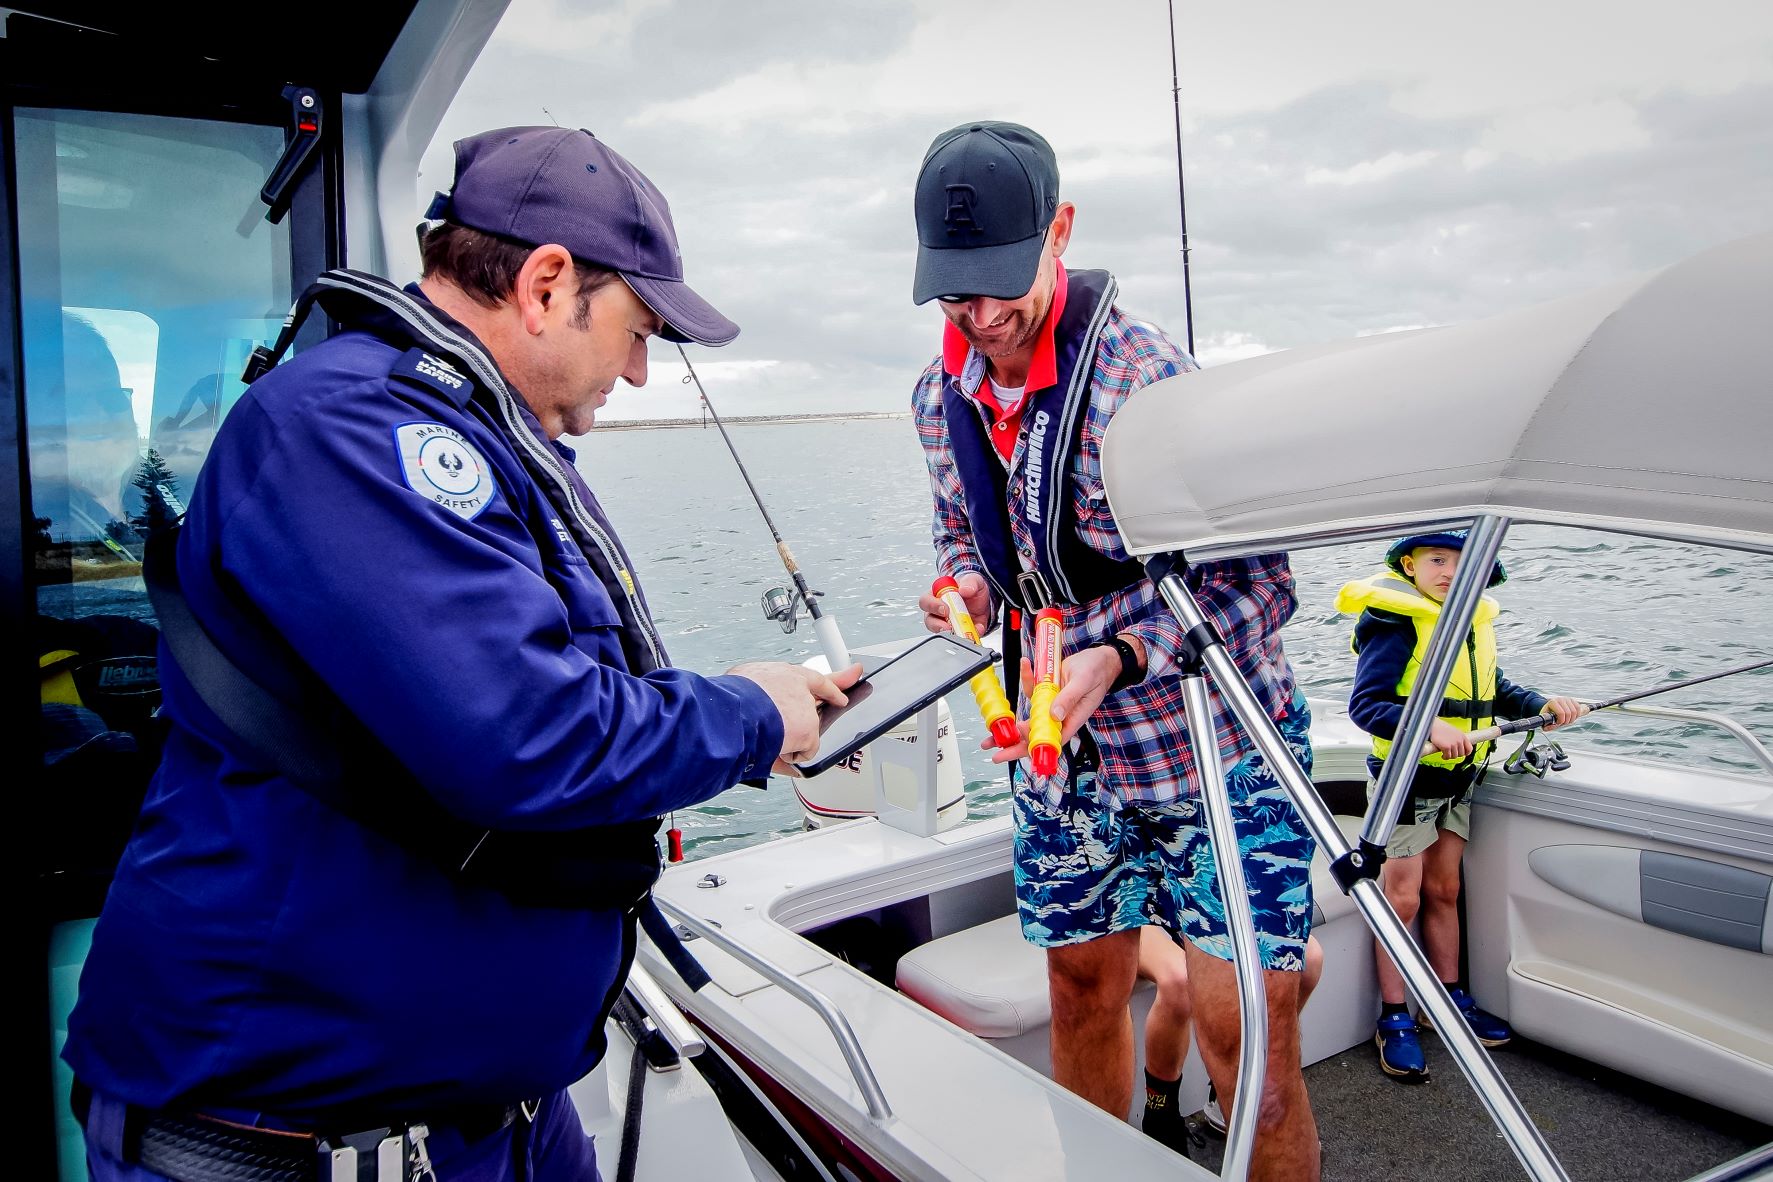 Marine Safety Officer checking flares of boater on water